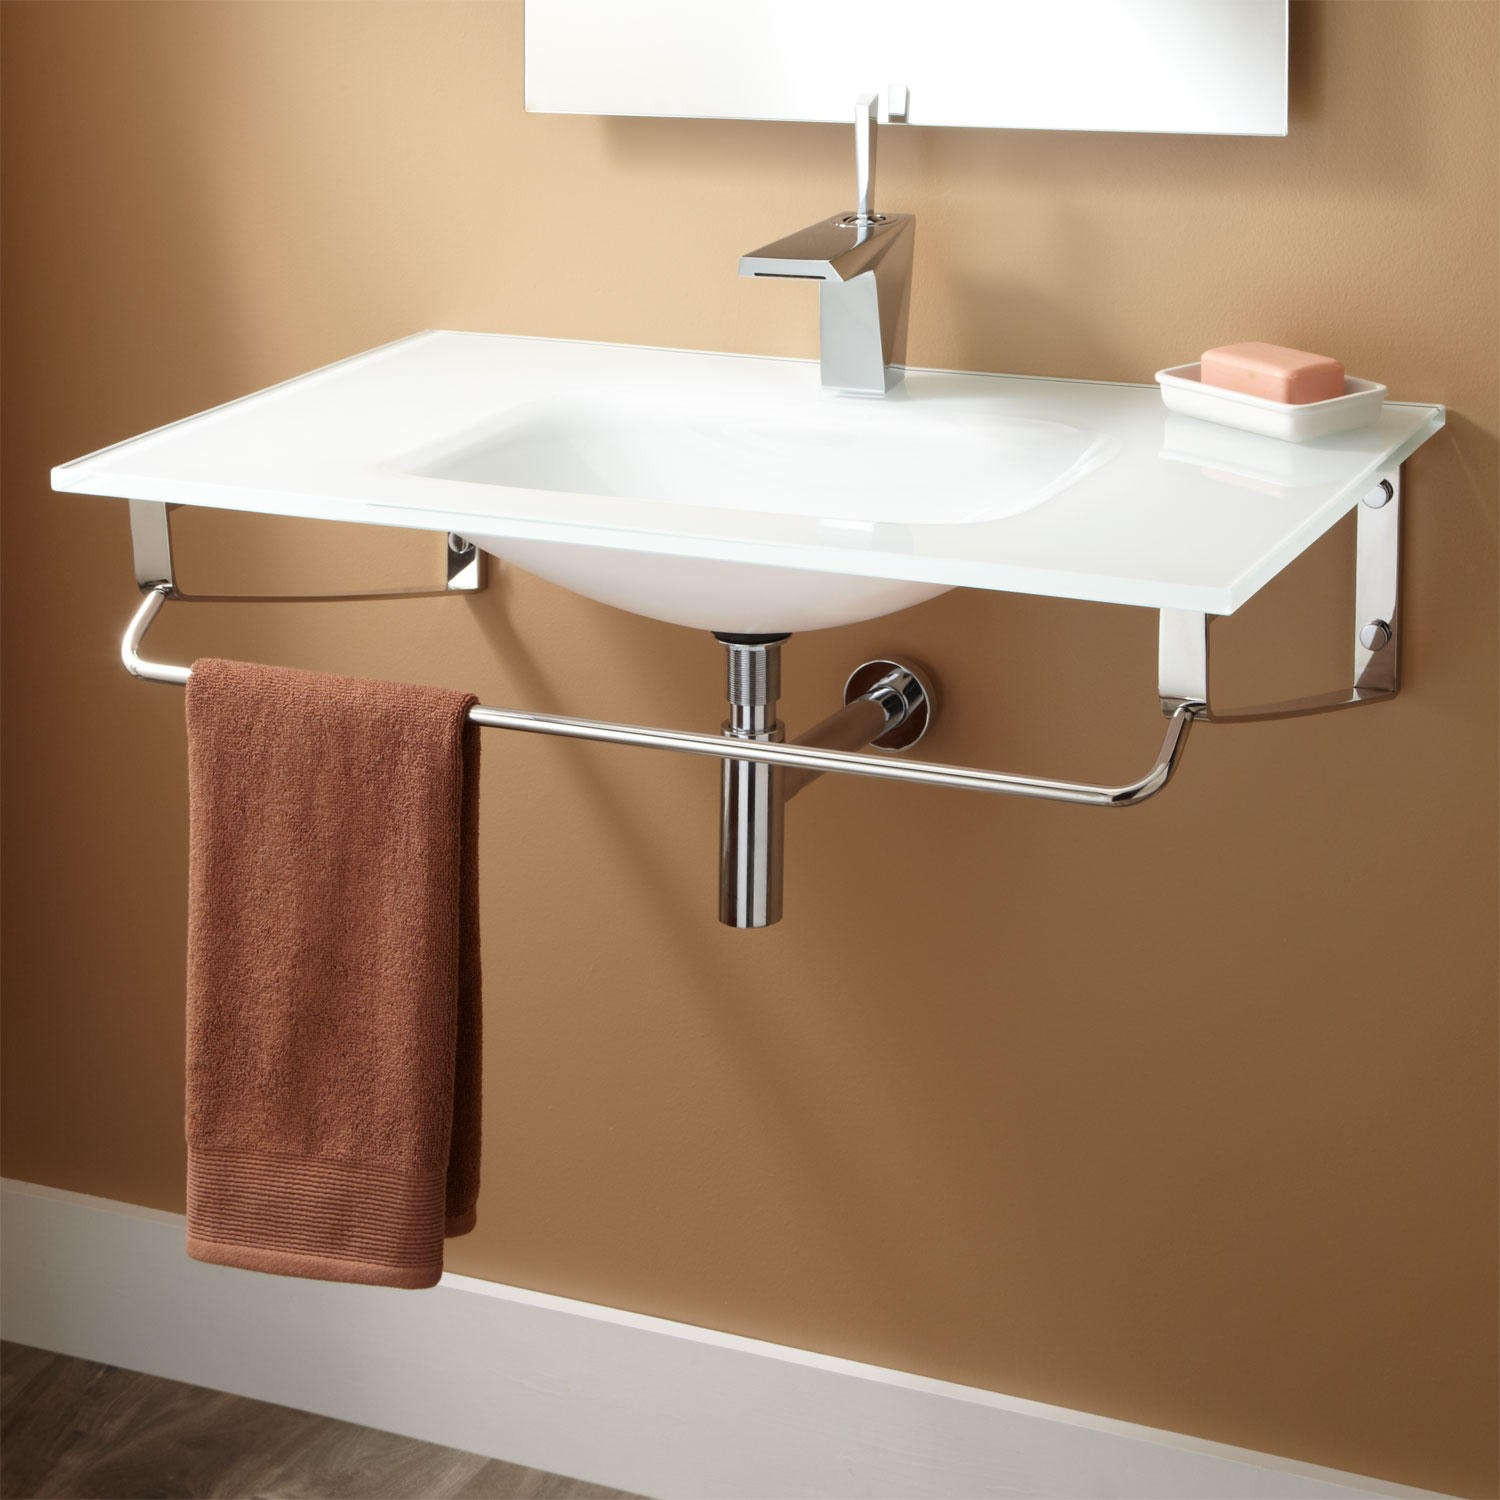 Wall Mounted Kitchen Sinks
 How to Install Wall Mounted Sink MidCityEast